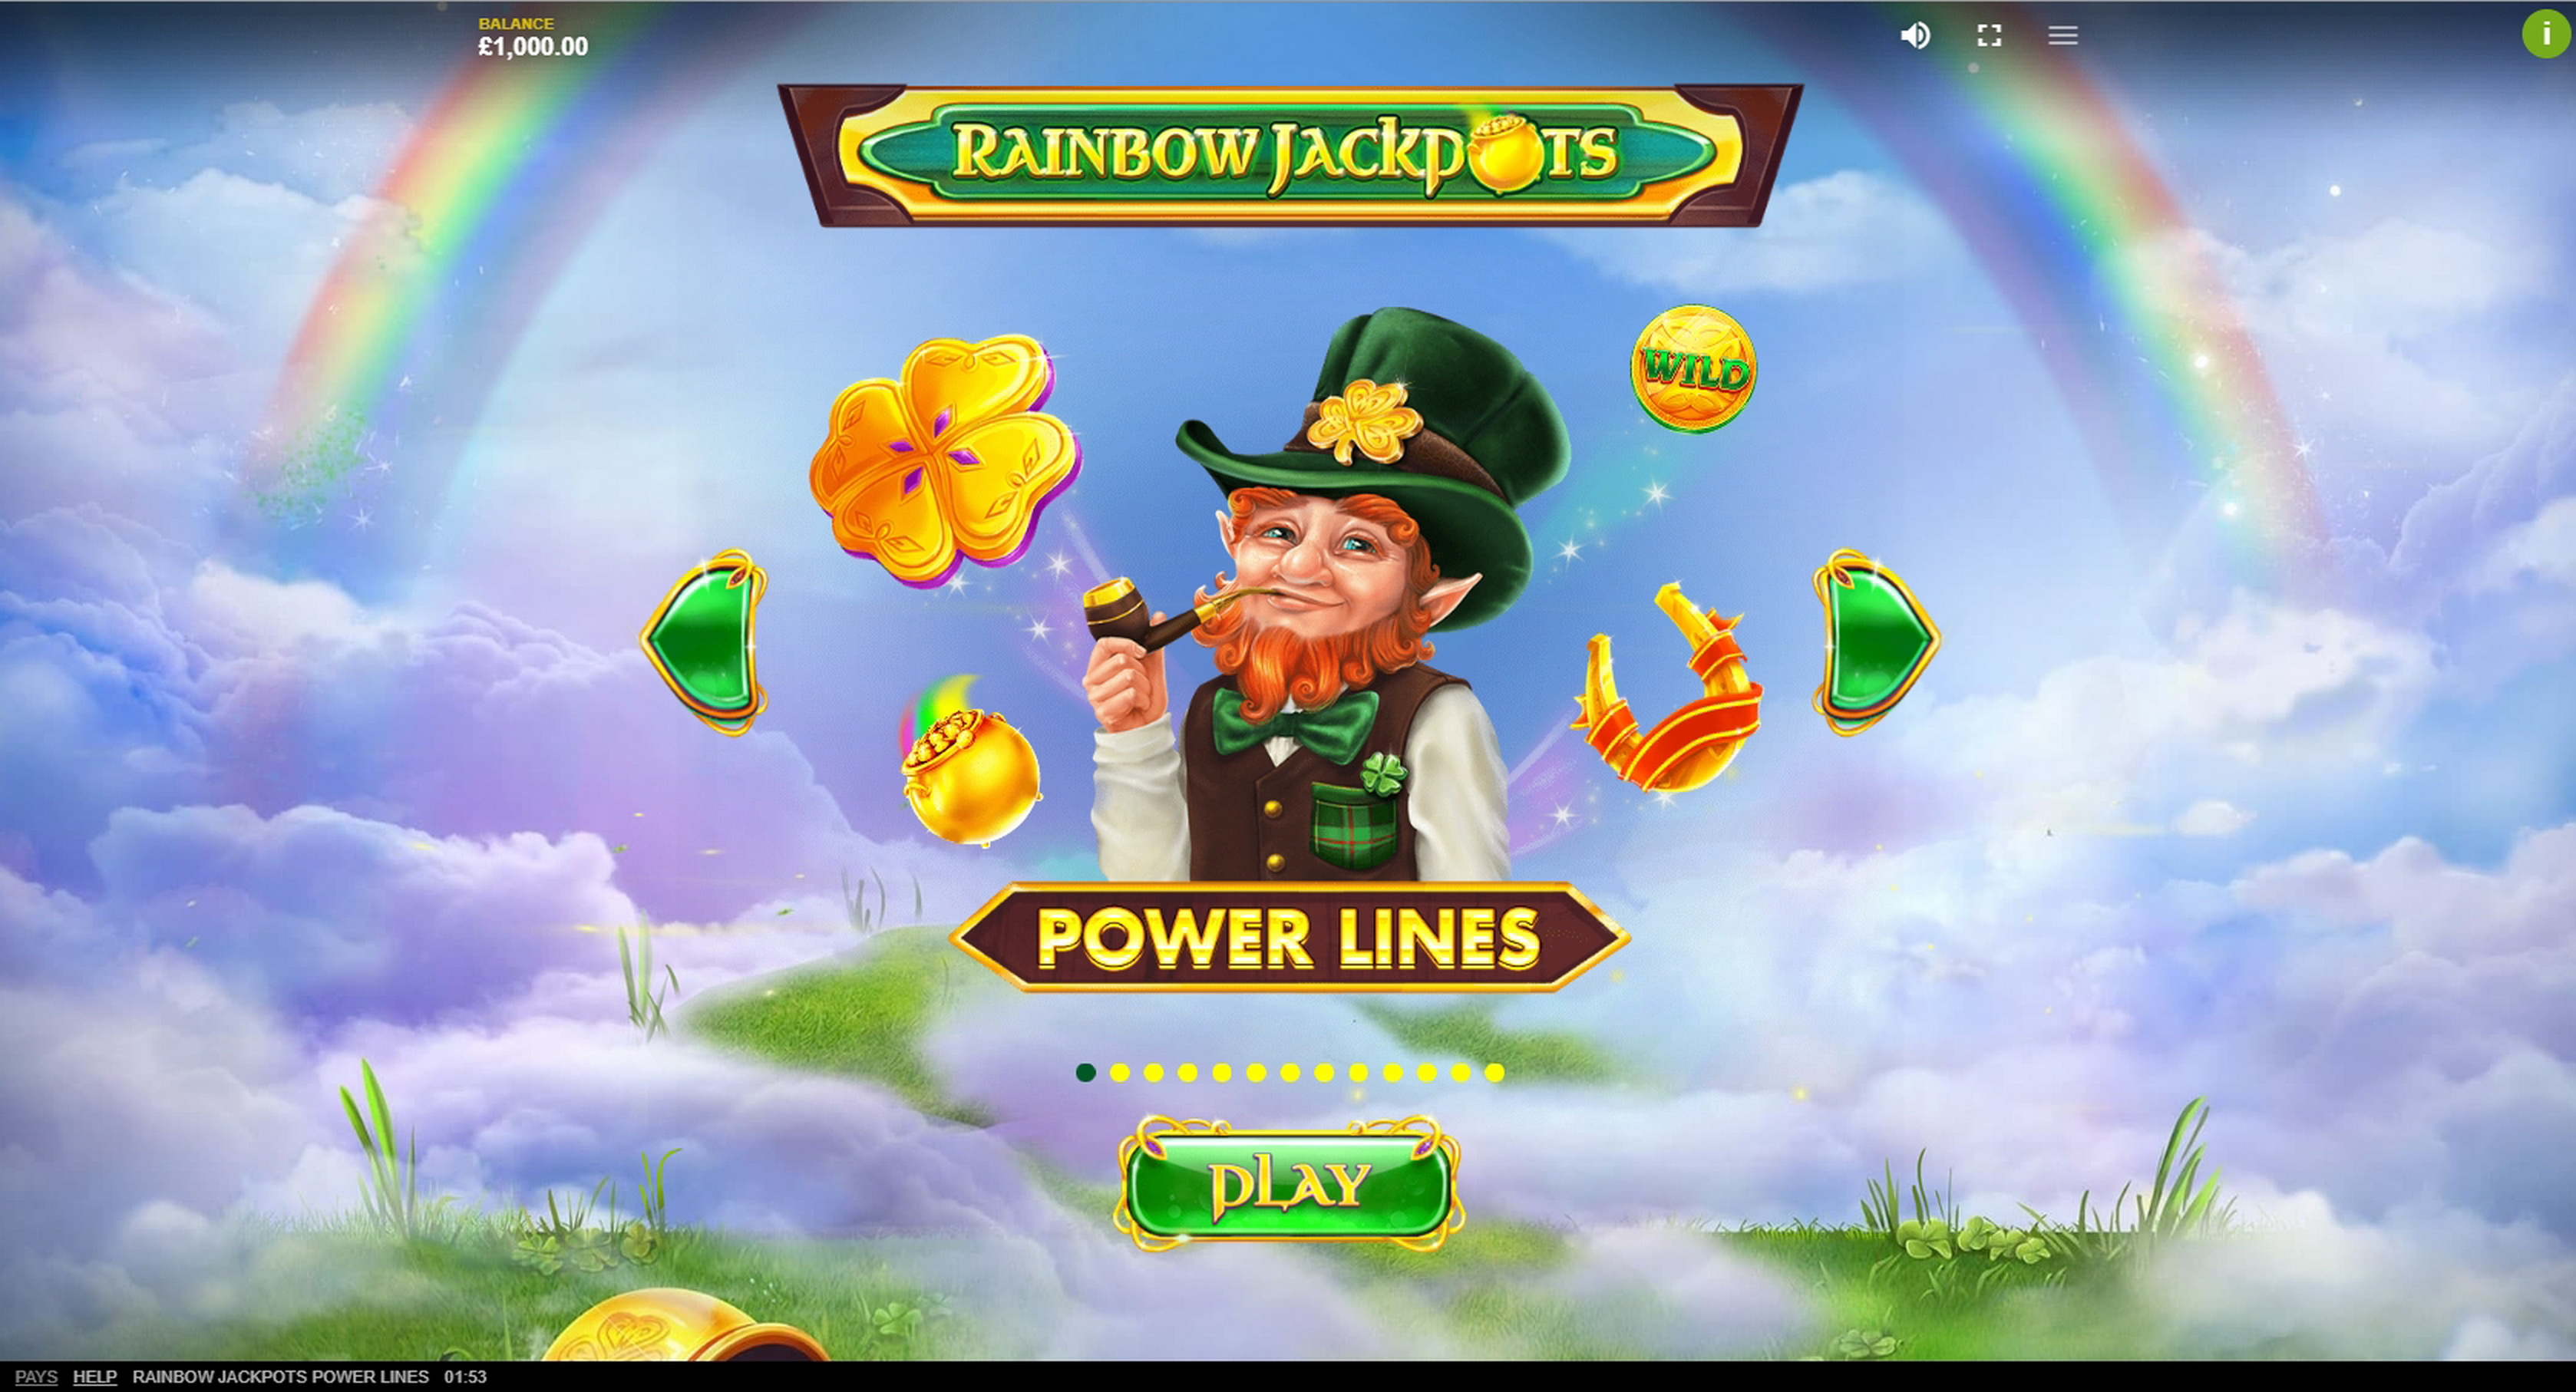 Play Rainbow Jackpots Power Lines Free Casino Slot Game by Red Tiger Gaming